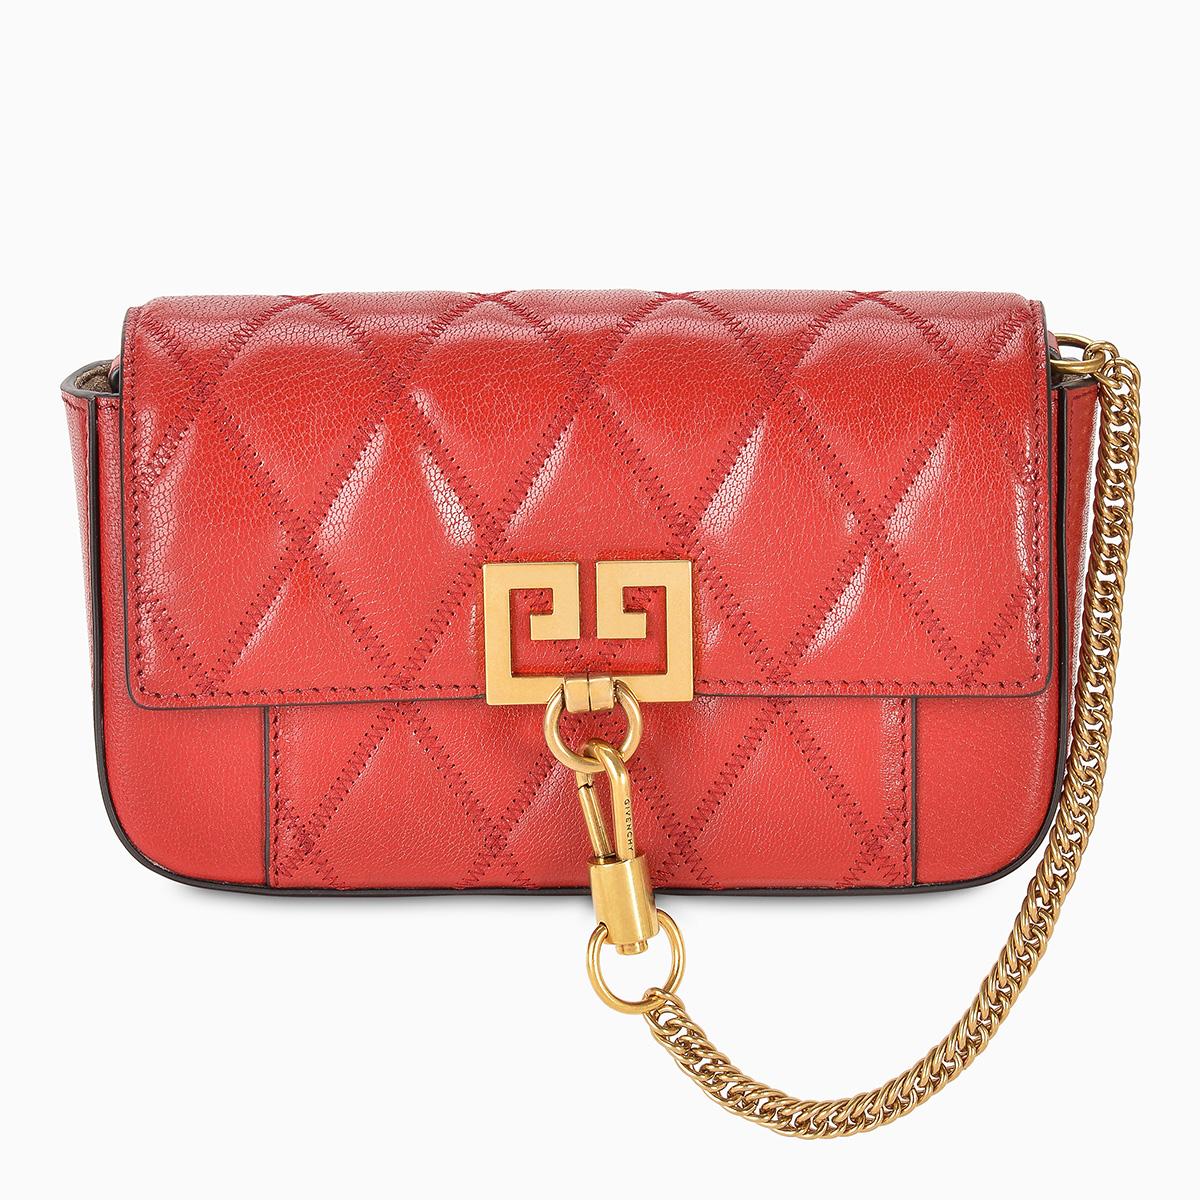 Givenchy Pocket Mini Bag In Red Quilted Leather - Lyst